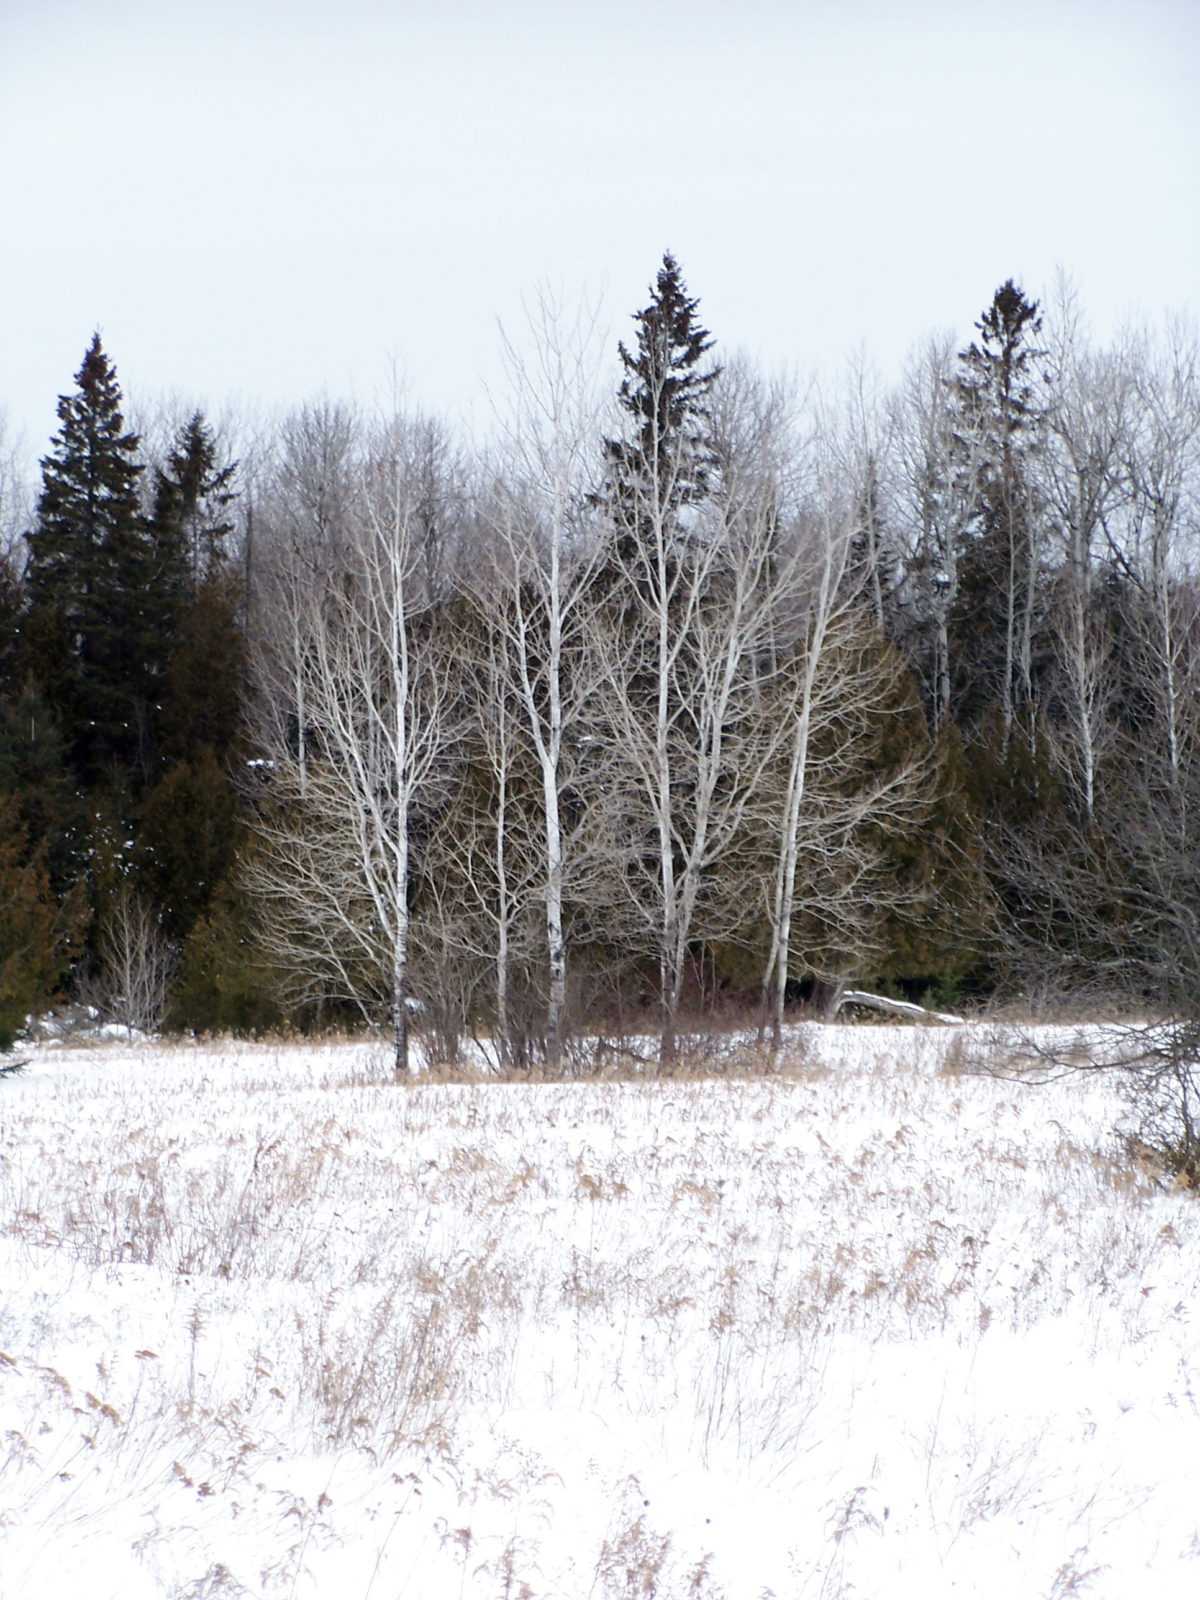 A copse of birch trees stands in a snowy, old field, with darger conifers behend.